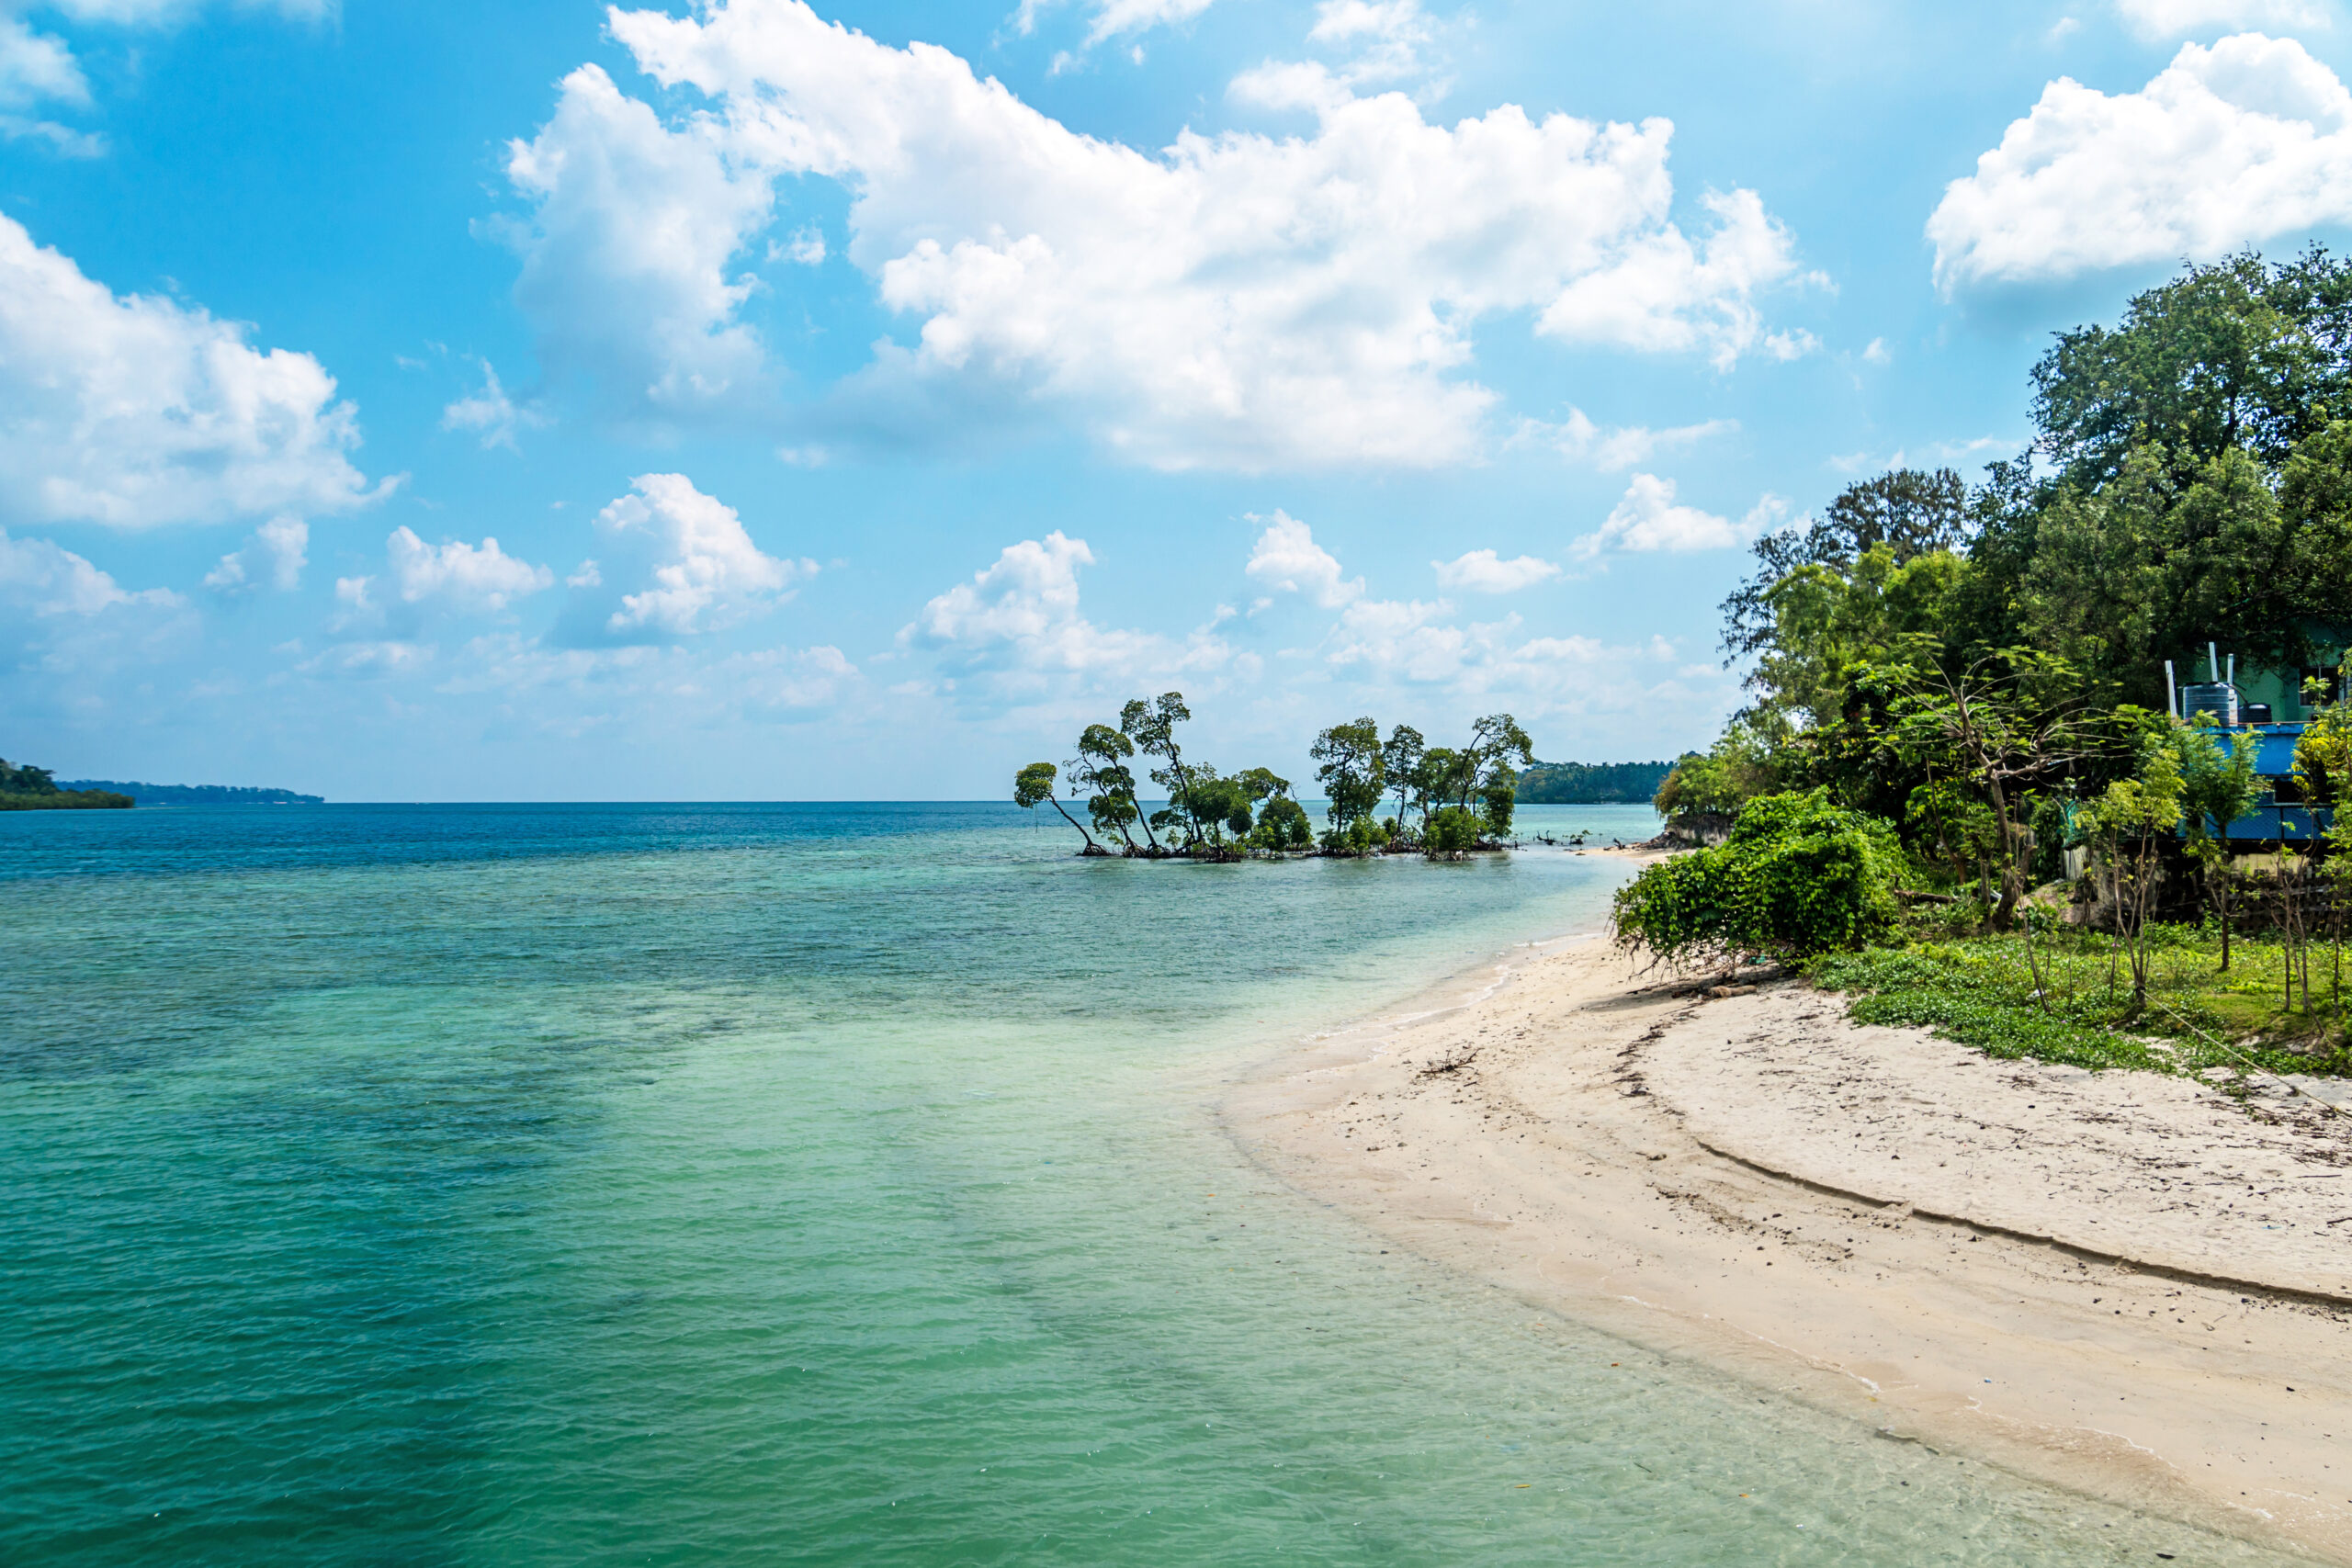 <p><span>This remote island in the Andaman Islands is home to the Sentinelese people, one of the last uncontacted tribes in the world. The Indian government has restricted access to the island to protect the tribe’s way of life and prevent the spread of diseases.</span></p>